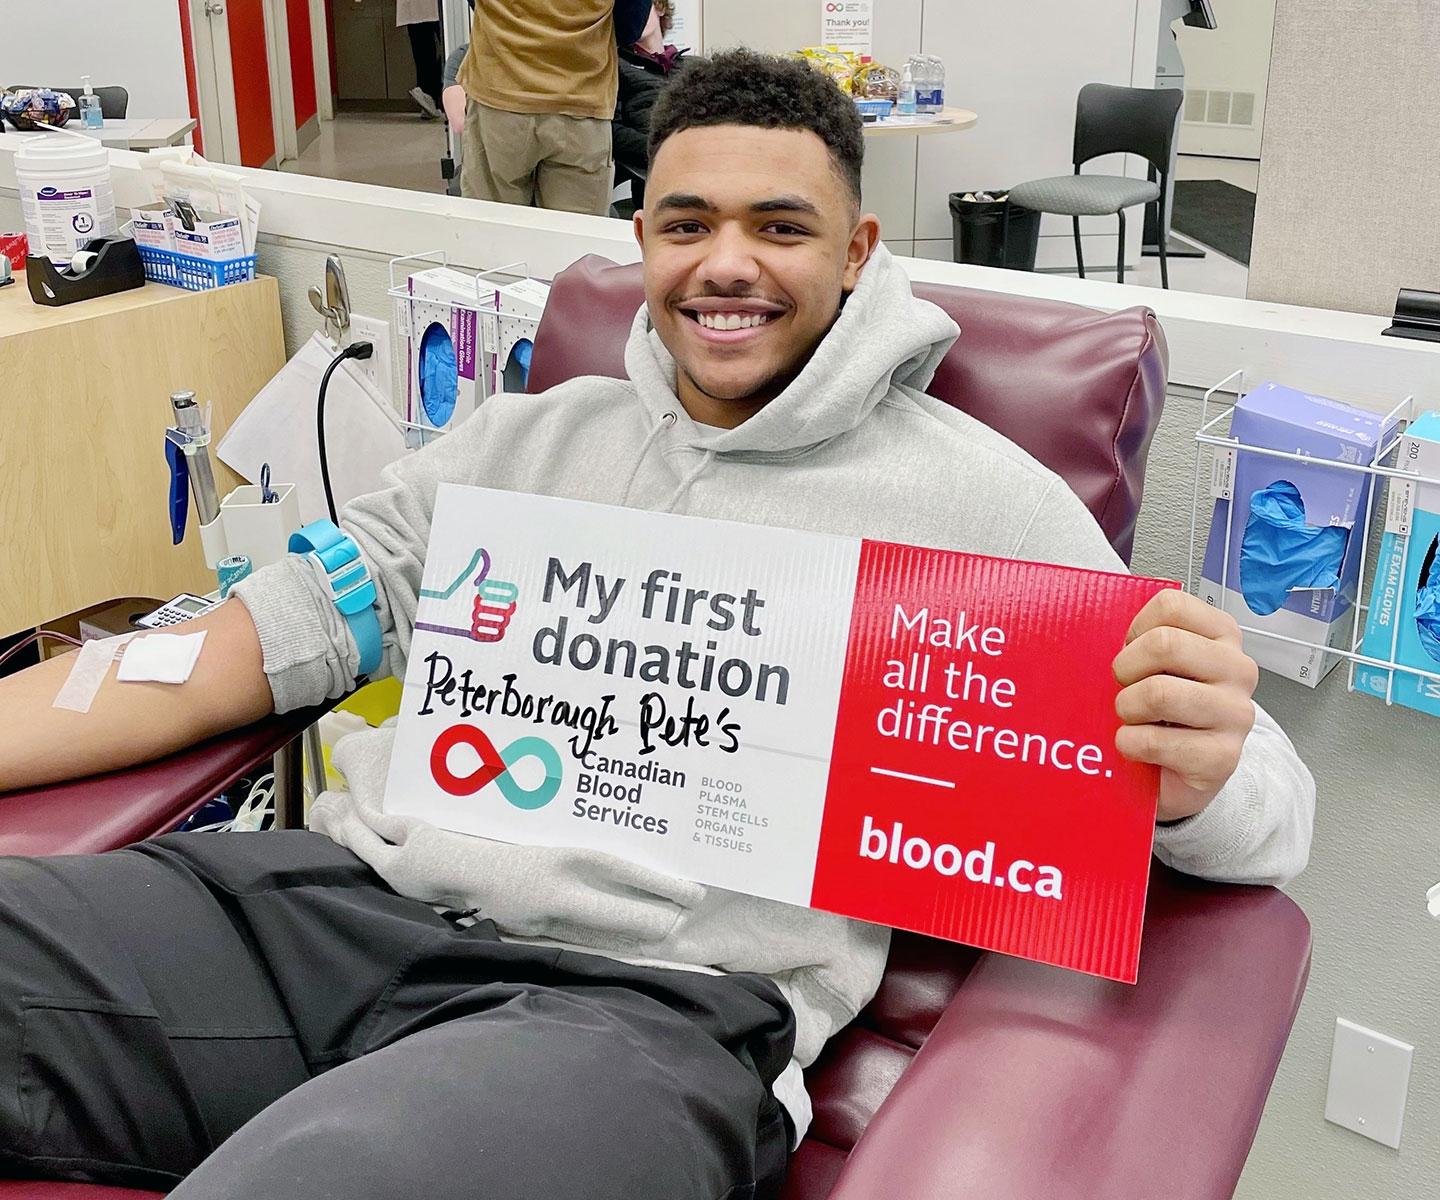 Blood donor in donor chair holding a “My first donation” sign